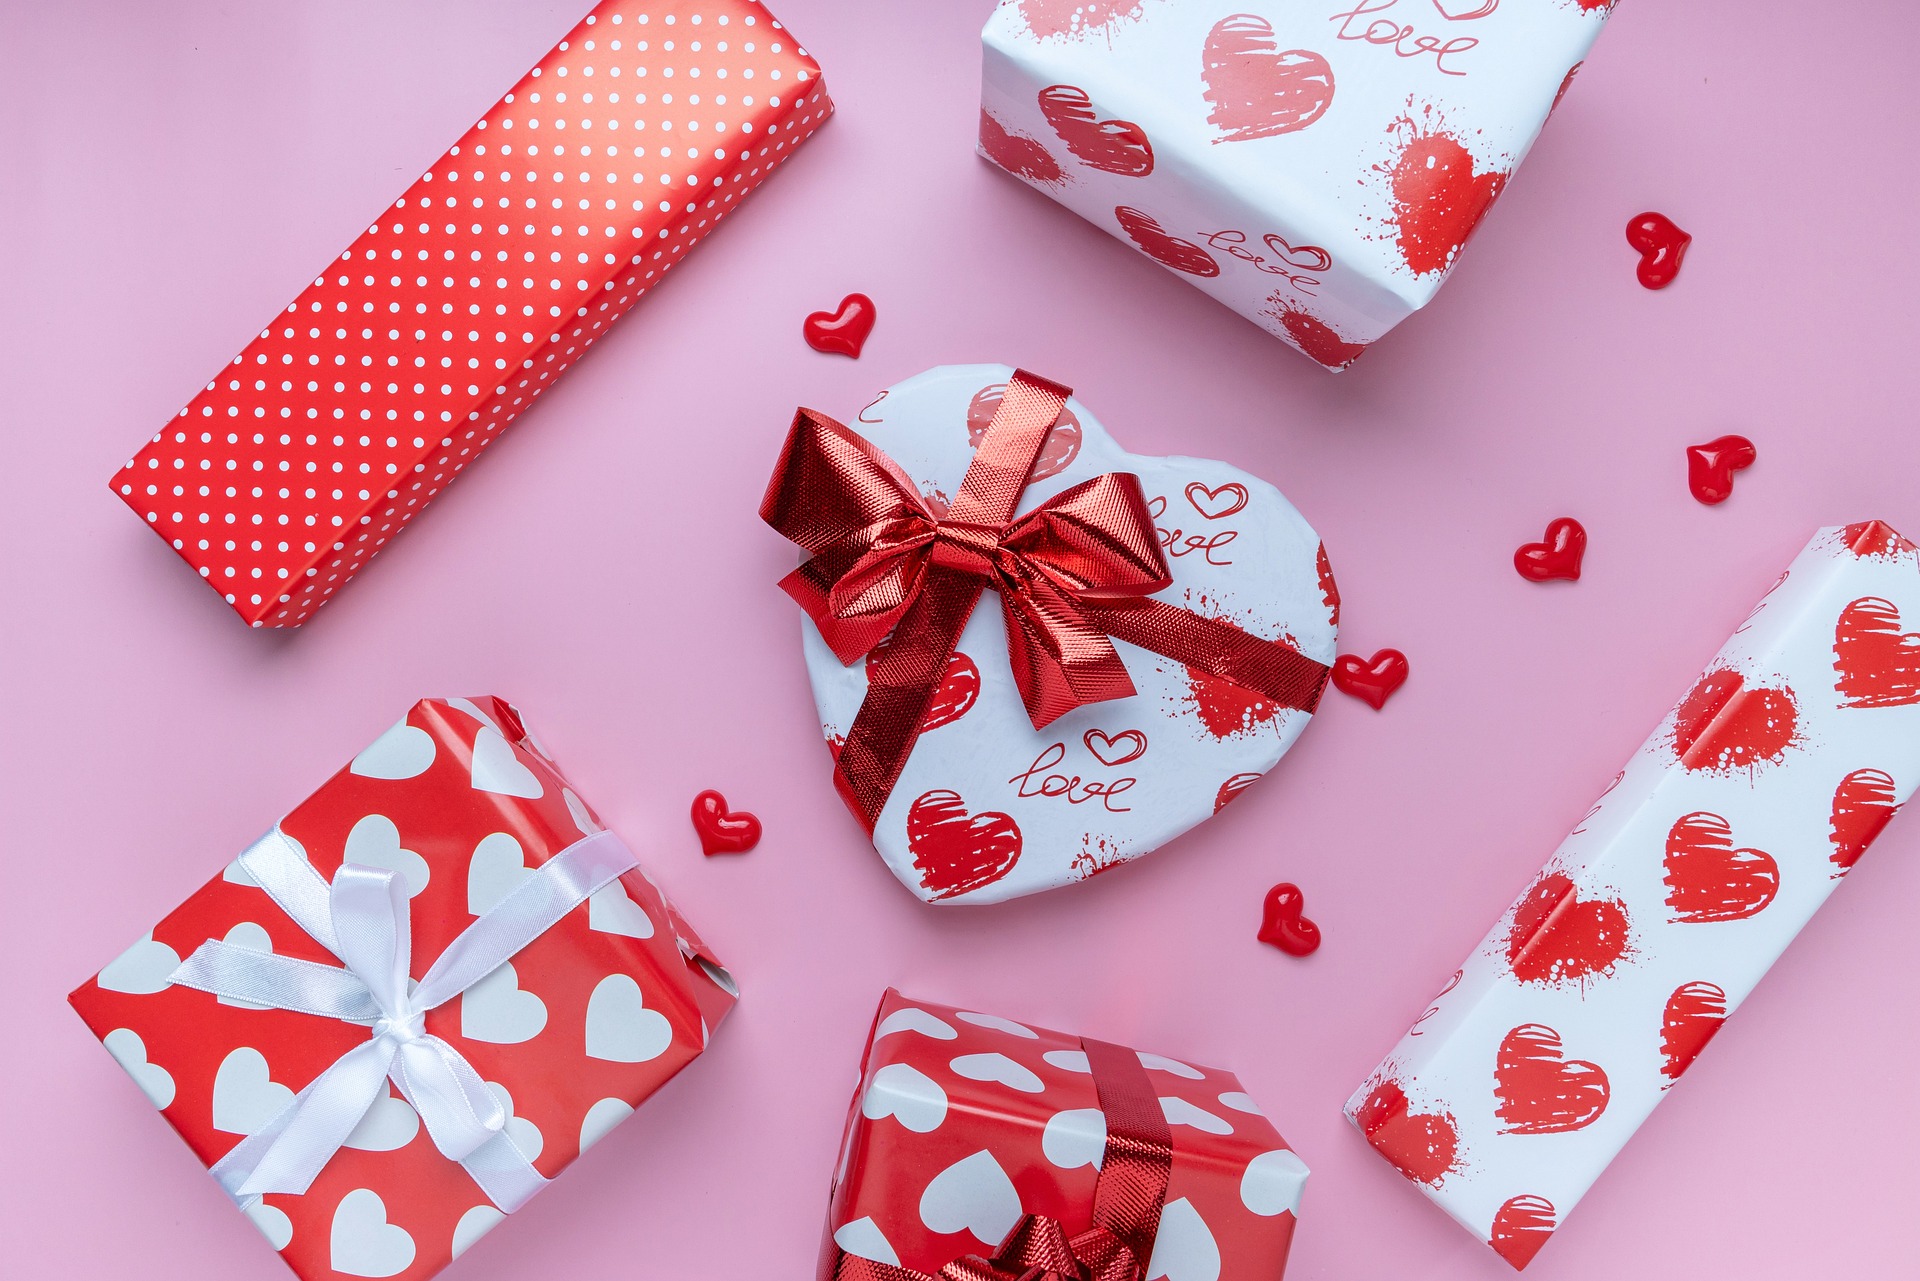 Gifts for romantic Partner on First Night